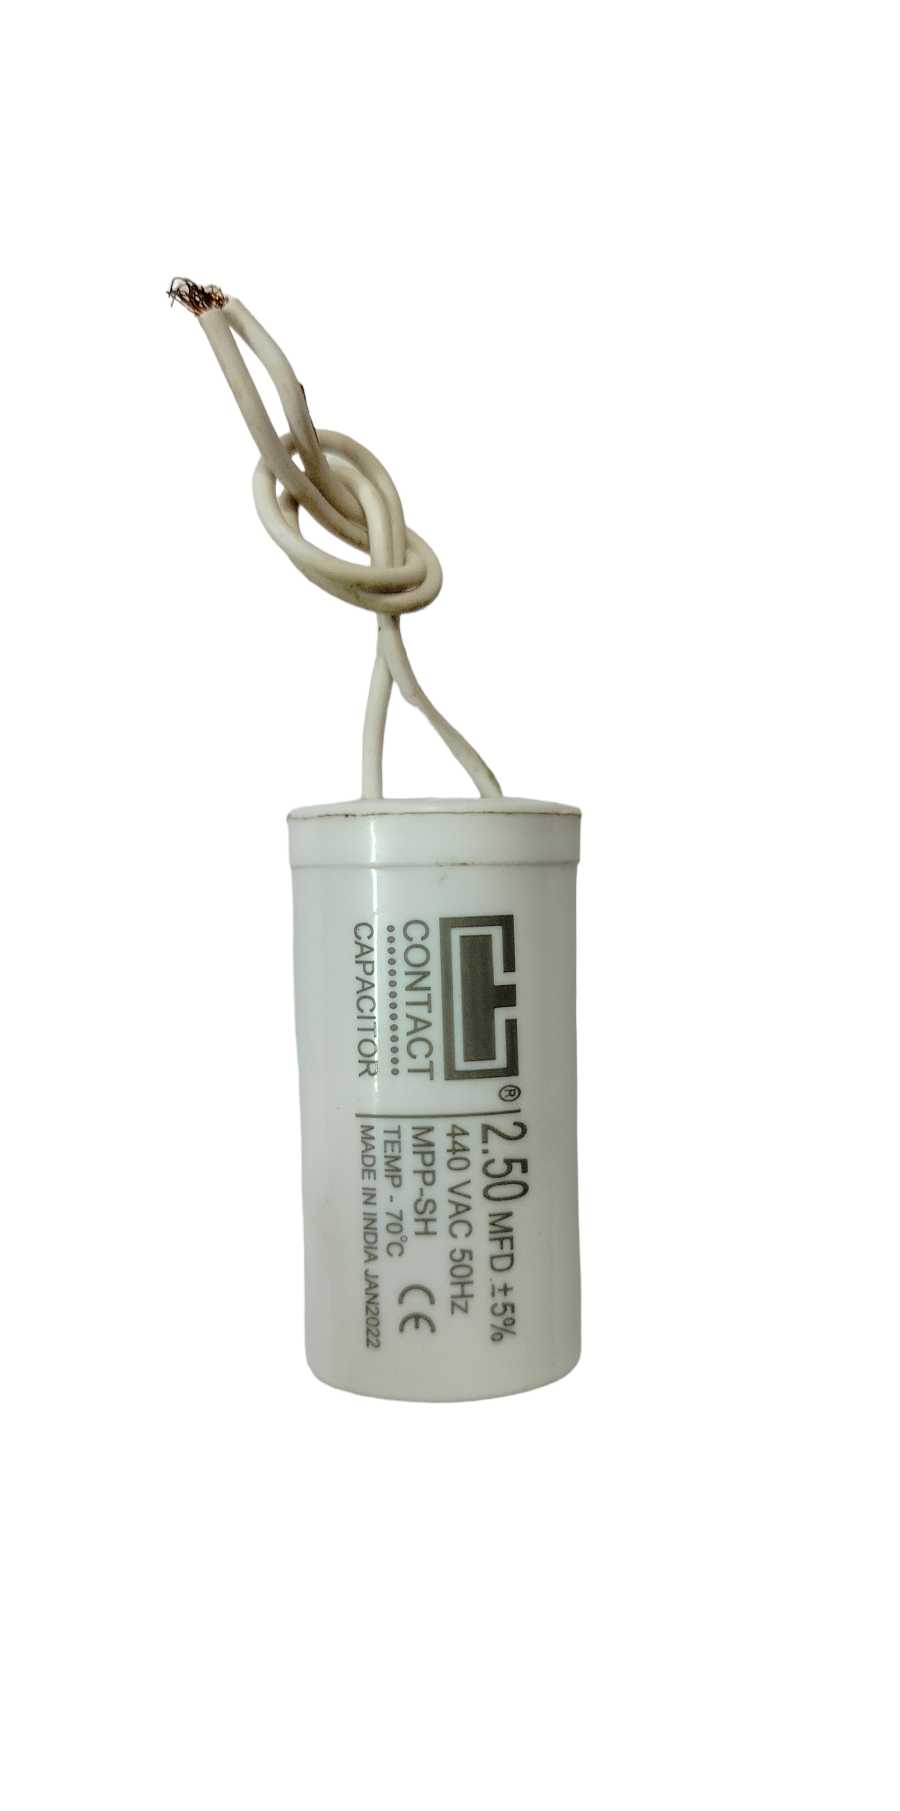 Contact Capacitor 2.50 MFD Supplier in gwalior